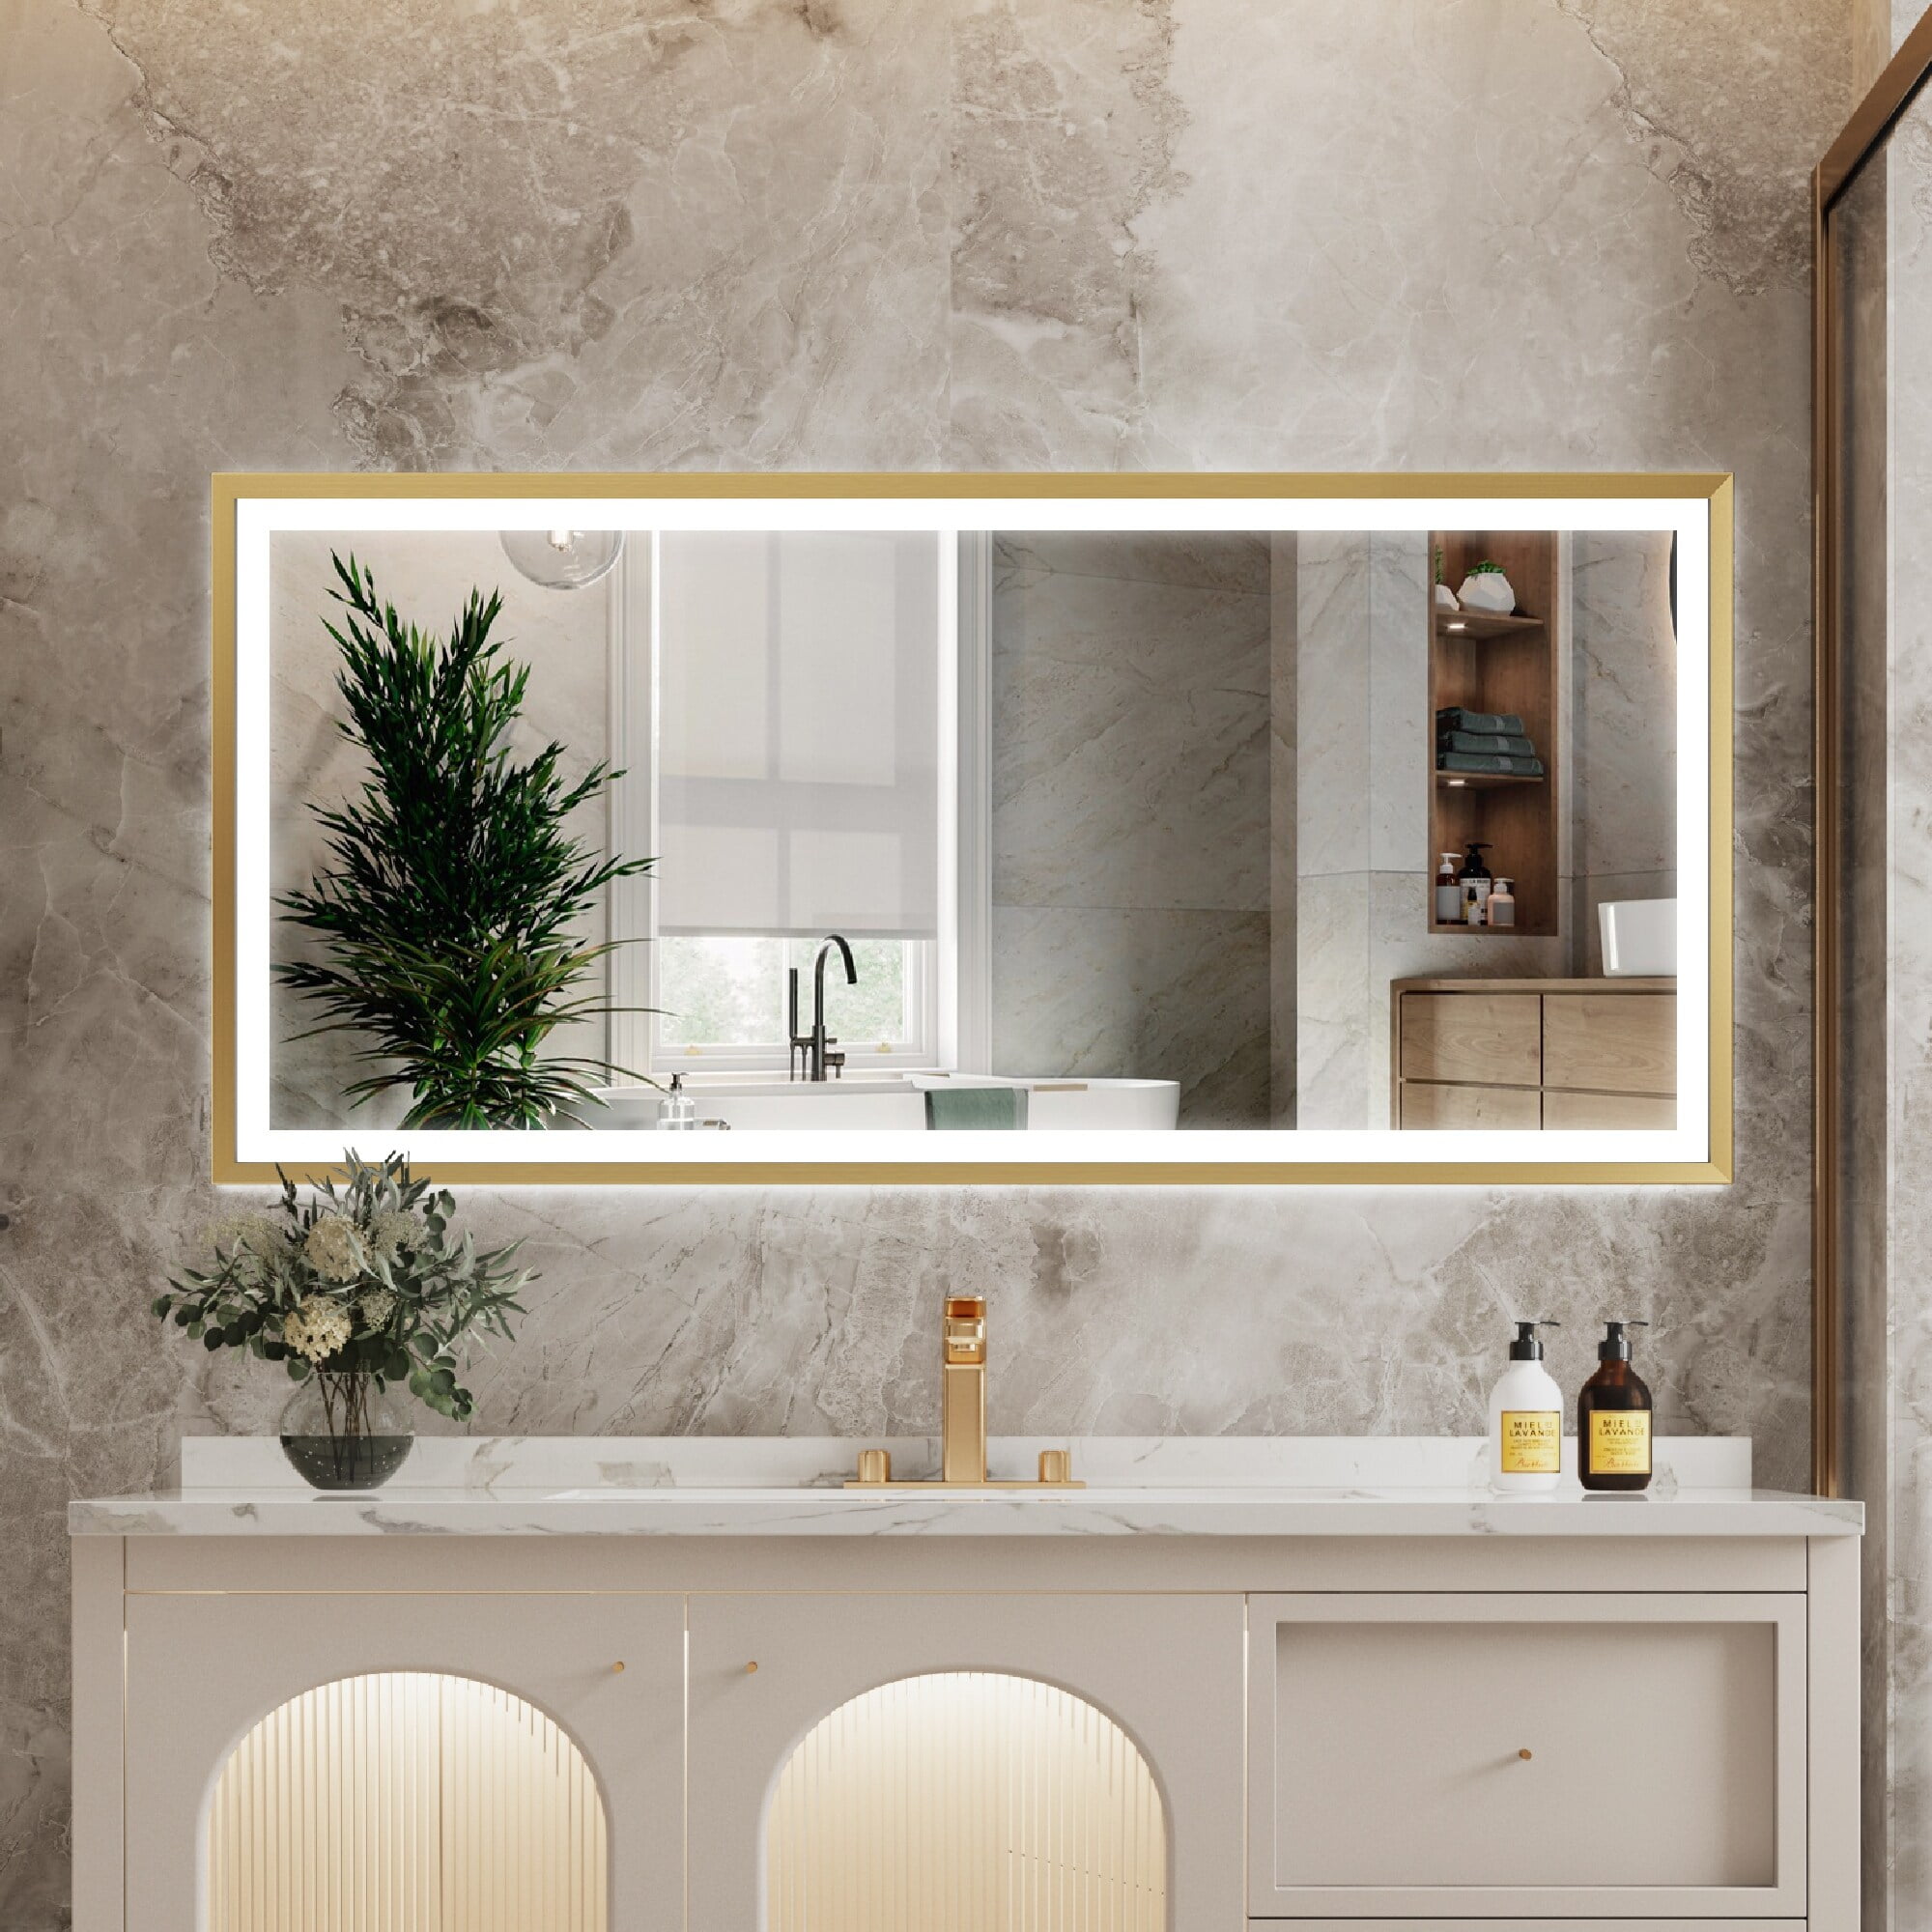 24 x 32 Shelf LED Bathroom Mirror, Frame, Touch Control, Defogger, CCT Remembrance, Wall Mounted Lighted Bathroom Mirror, Gold Frame